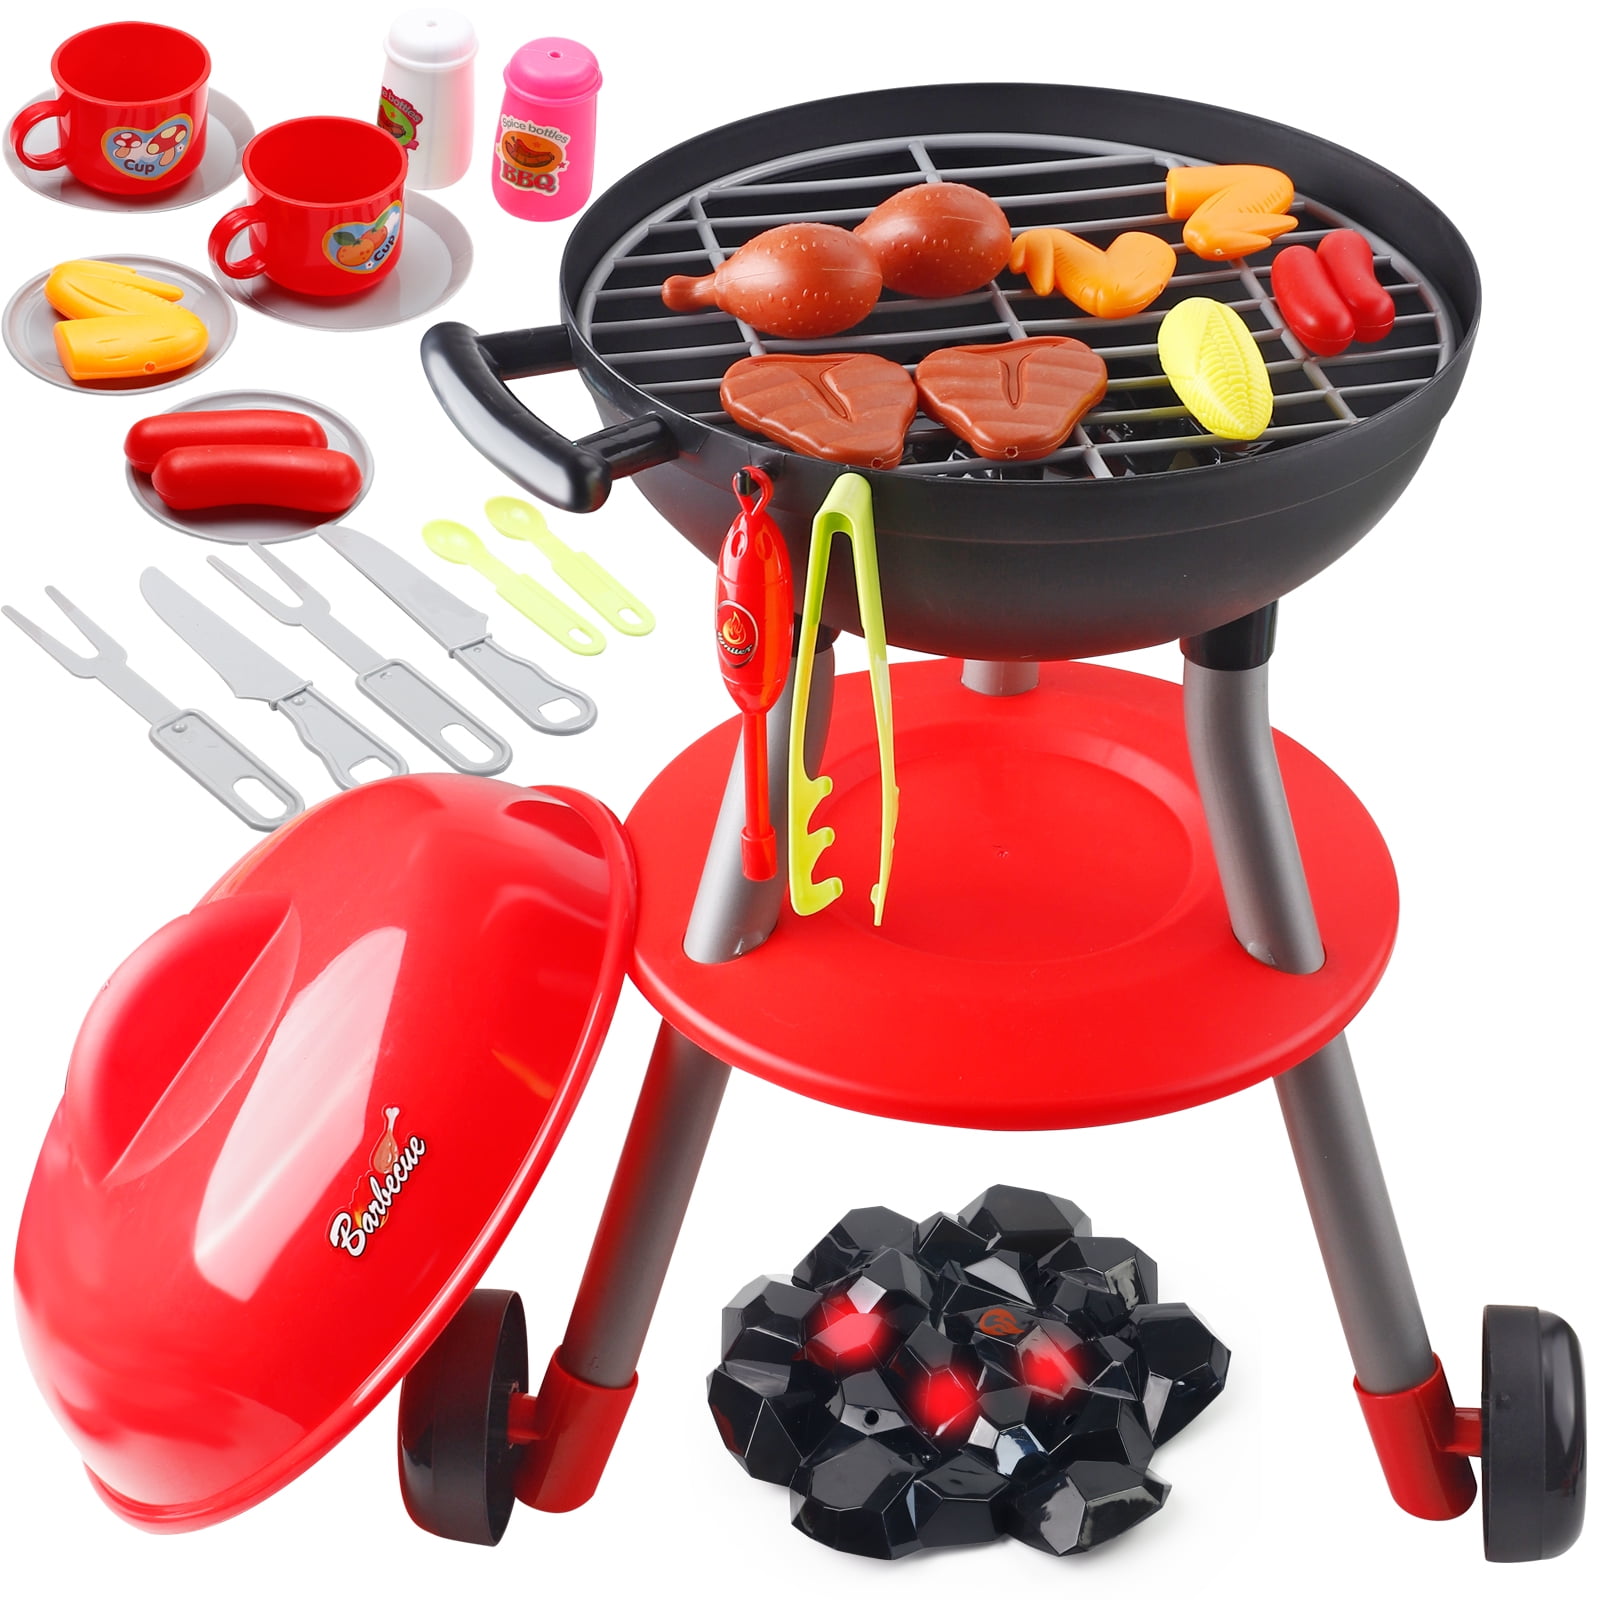 34 PCS Toy BBQ Grill Set, Little Chef Pretend Play, Cooking Kitchen Toy  Interactive BBQ To - Pretend Play Toys - Roanoke, Virginia, Facebook  Marketplace